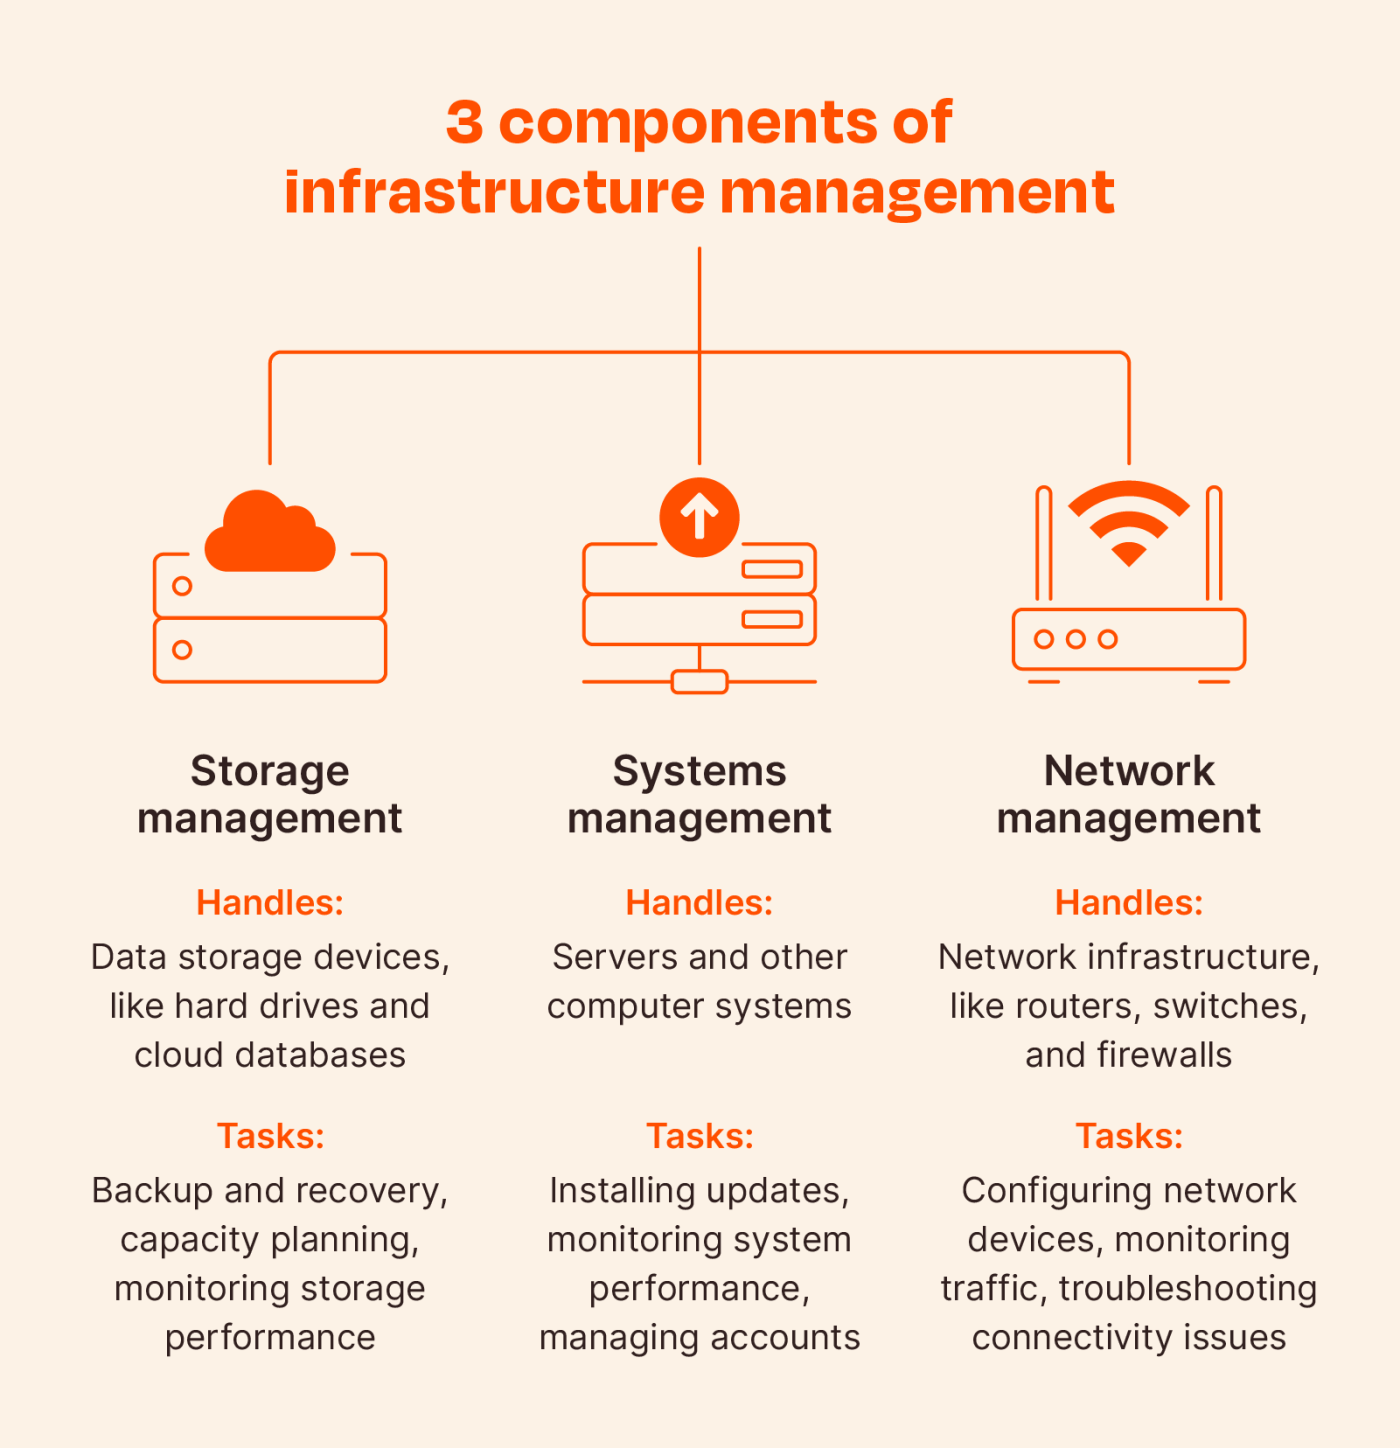 Graphic illustrating the three components of infrastructure management, which are storage management, systems management, and network management.